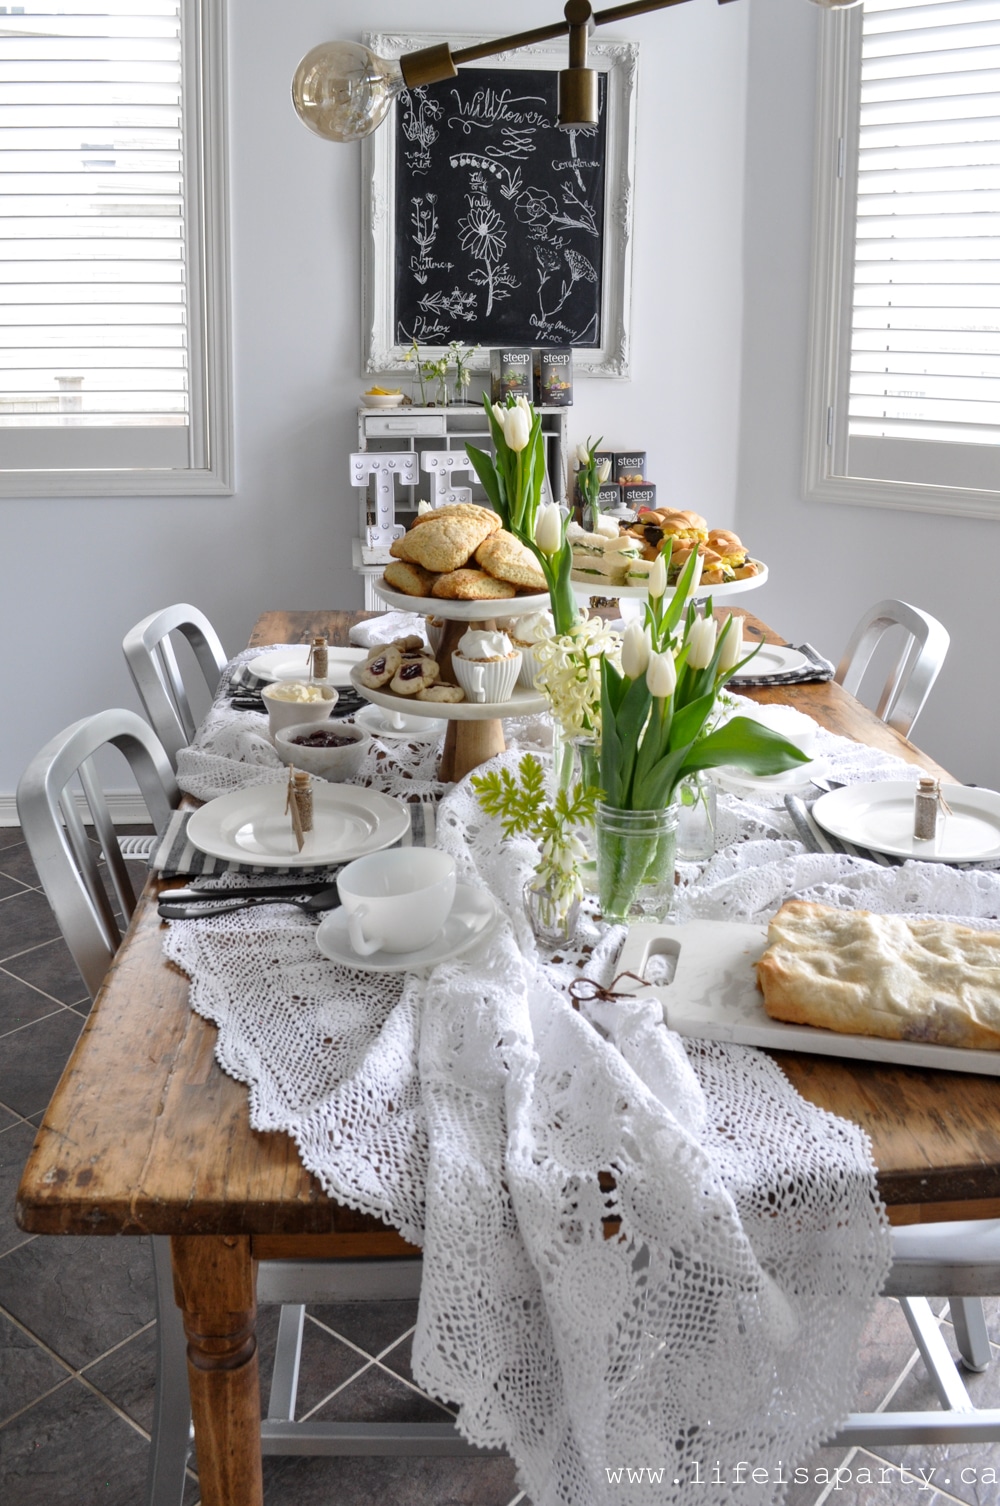 Tea Party and Plant Exchange: celebrate the beginning of gardening season with a plant exchange and tea party. Everyone brings a plant for everyone else from their garden, followed by a tea party together to celebrate the love of gardening.